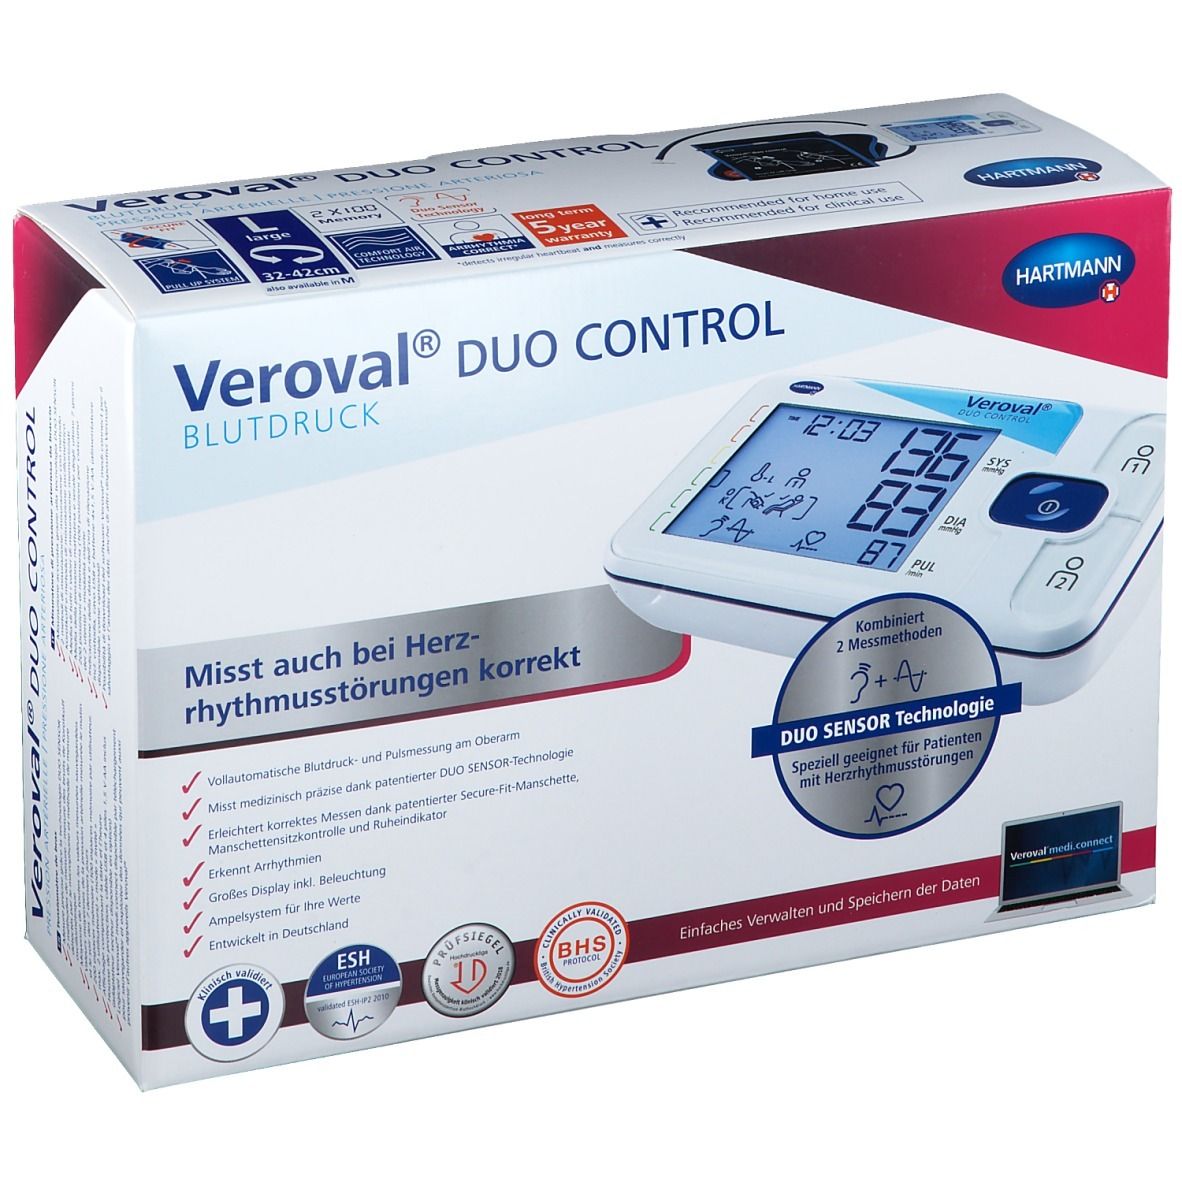 Veroval® DUO CONTROL large